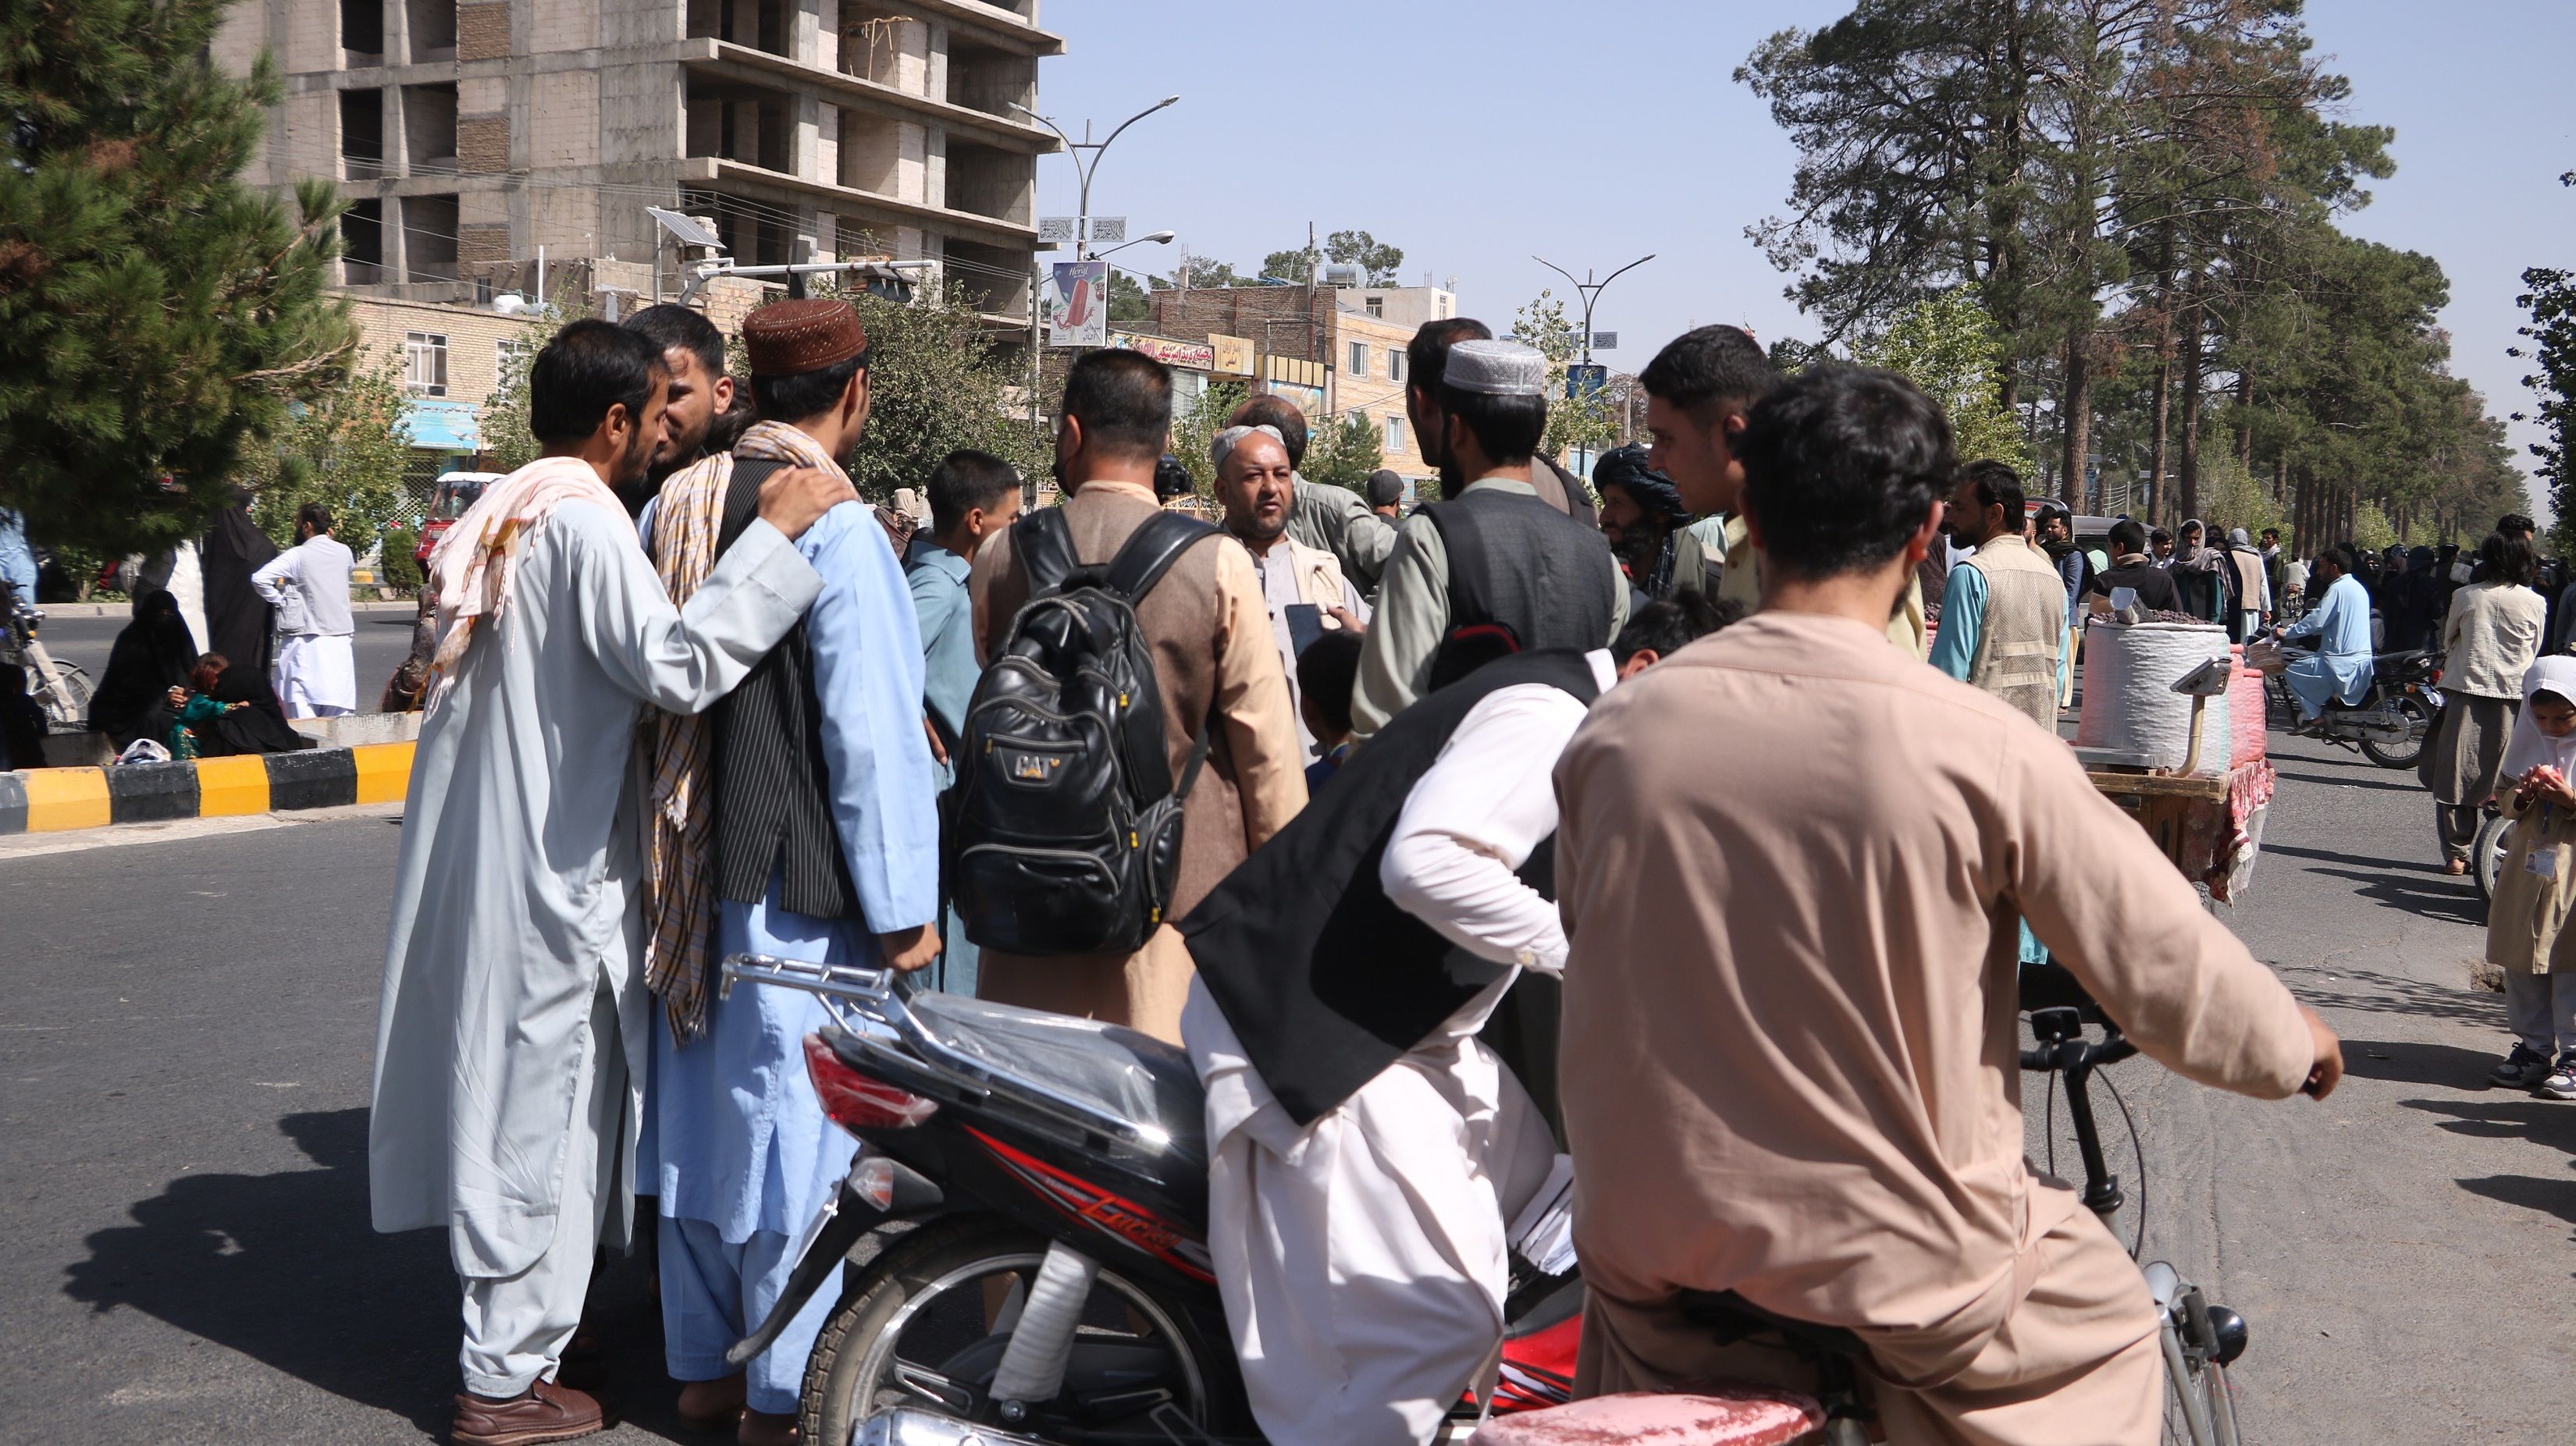 Residents come out onto a street after an earthquake rocked the city of Herat